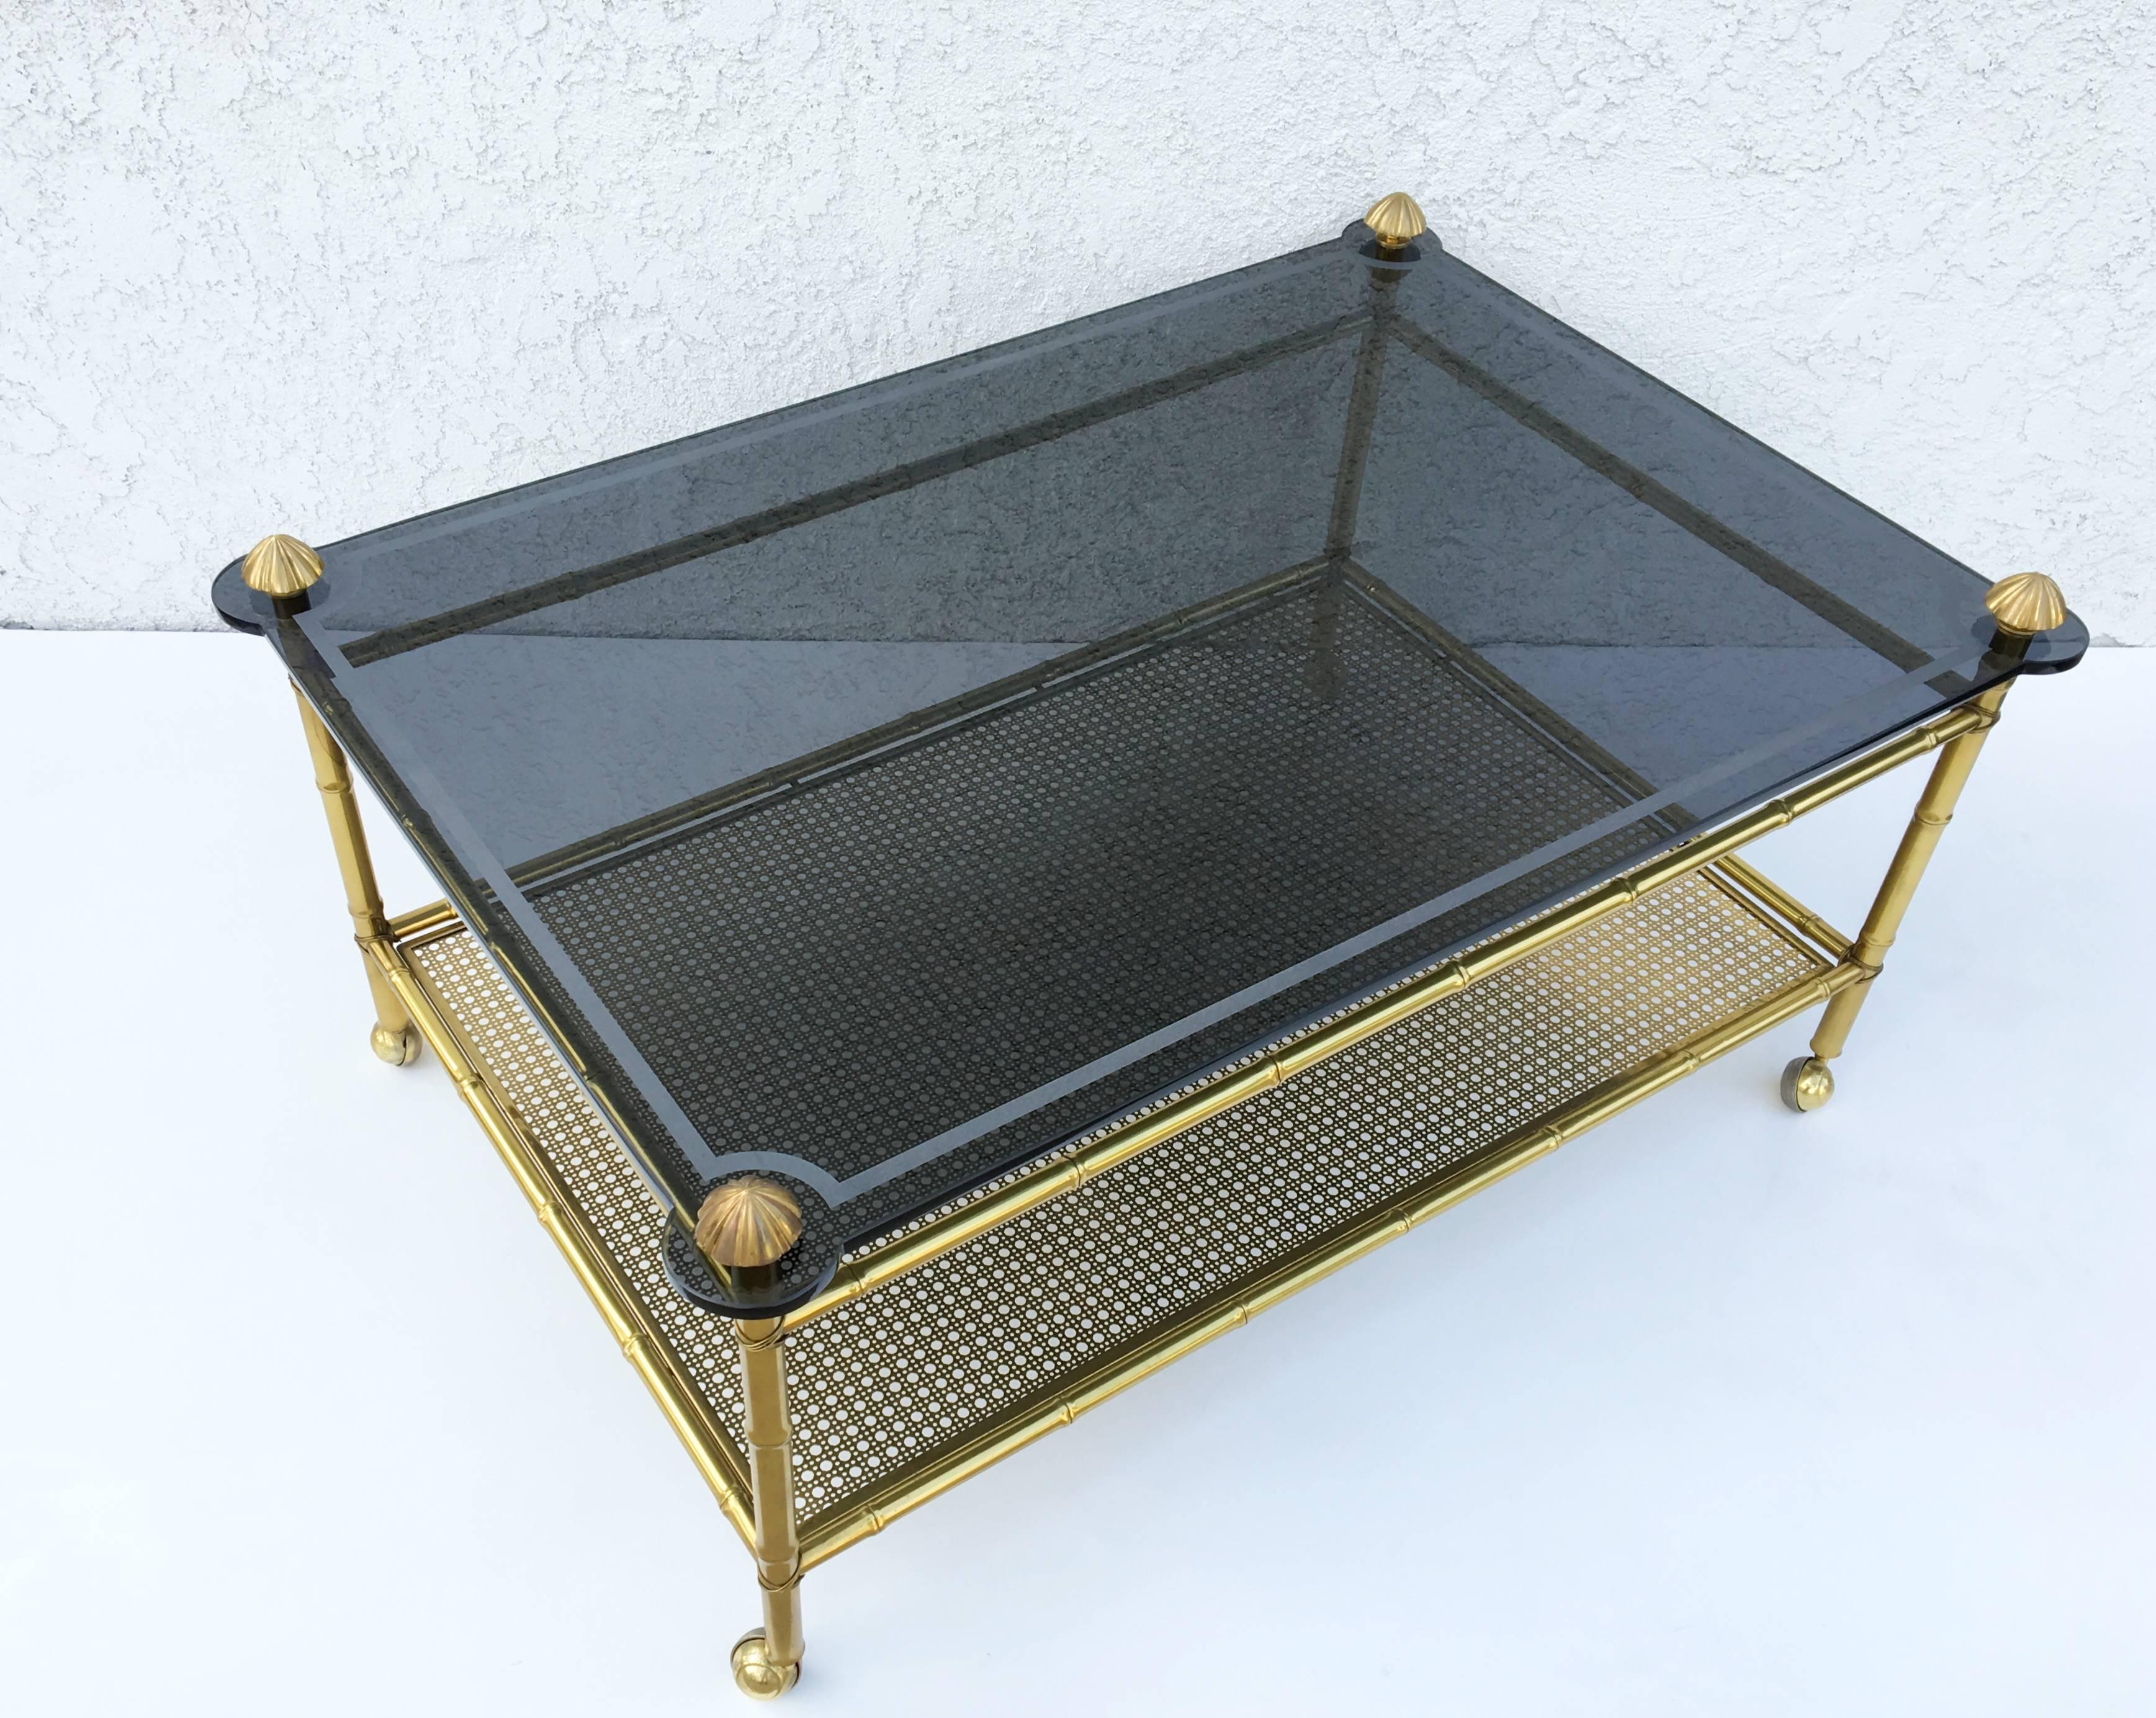 A glamorous 1960s French two-tiered brass faux bamboo and smoked glass top with a acidic edge design on casters. 
The glass is 1/2